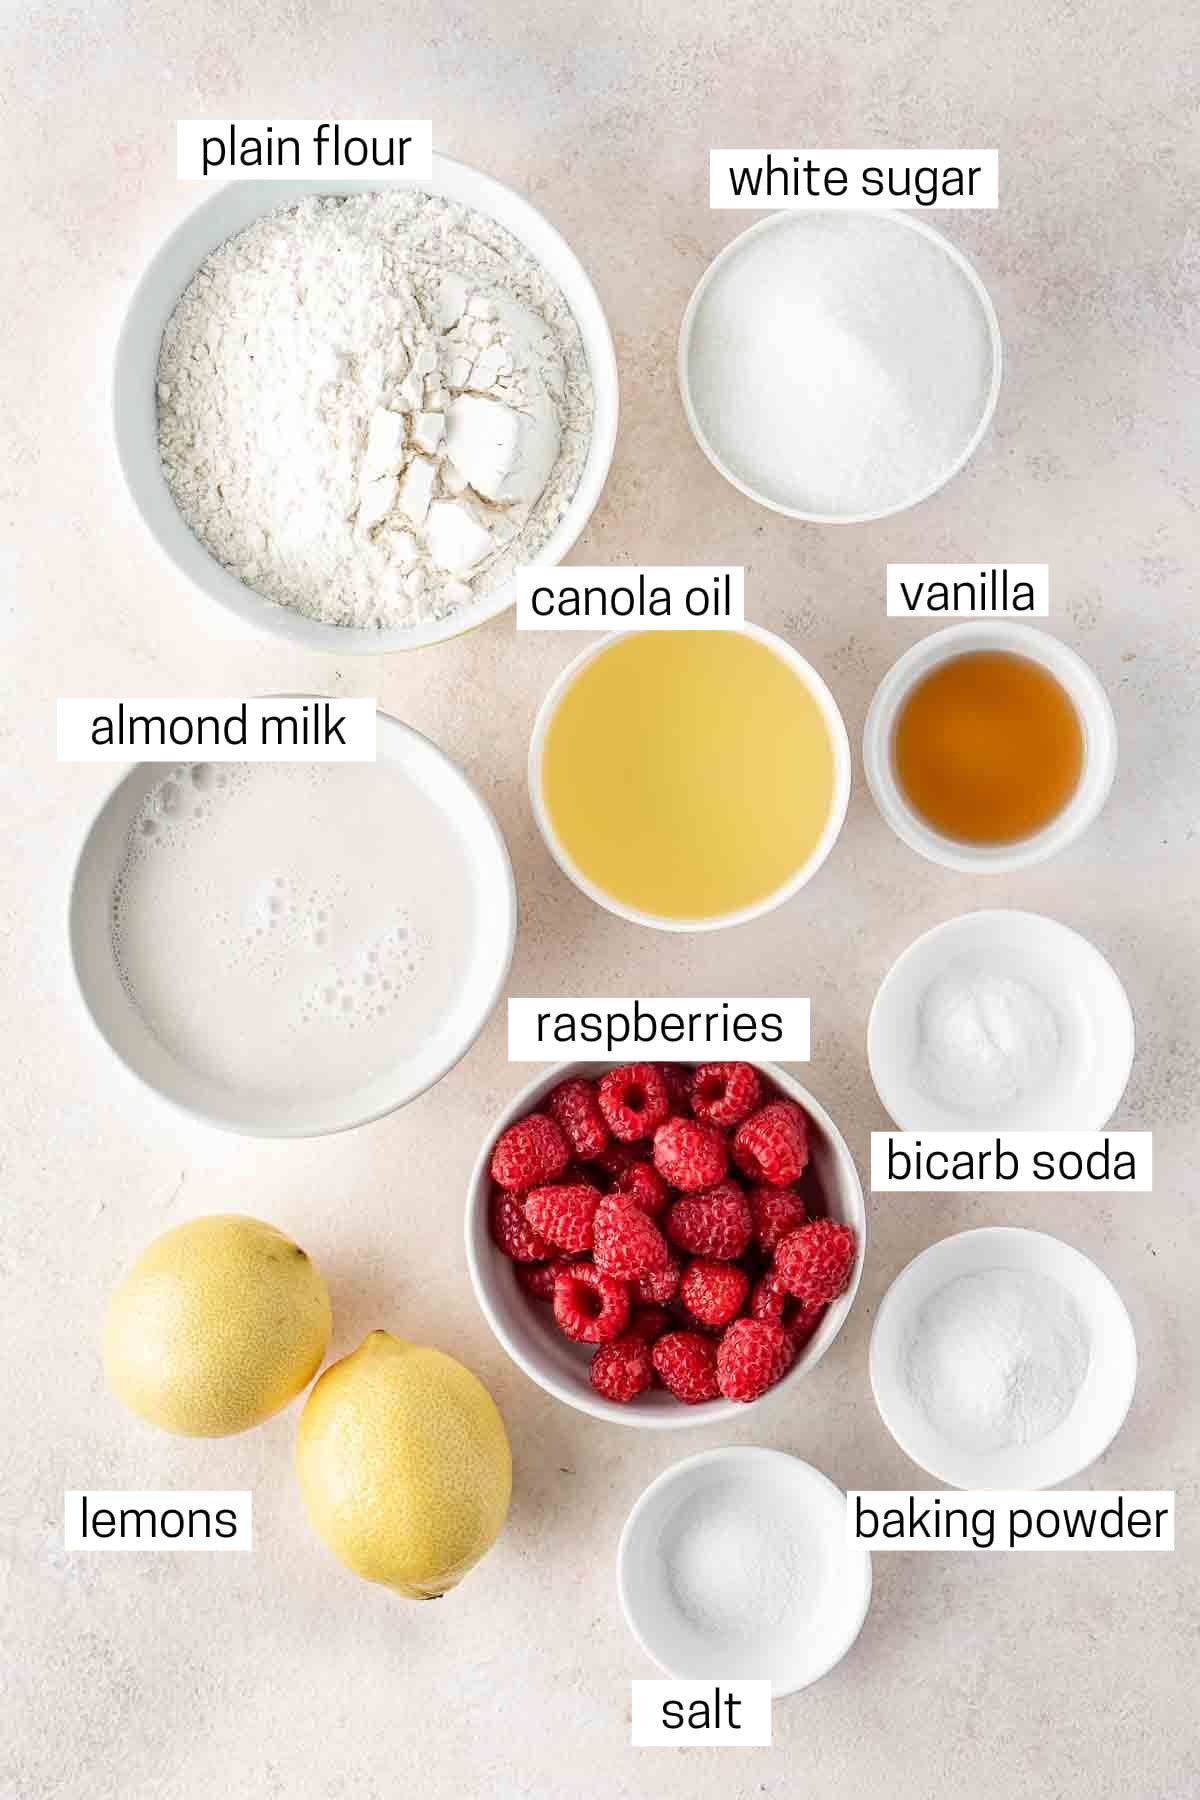 All ingredients needed to make raspberry and lemon loaf cake in small bowls.